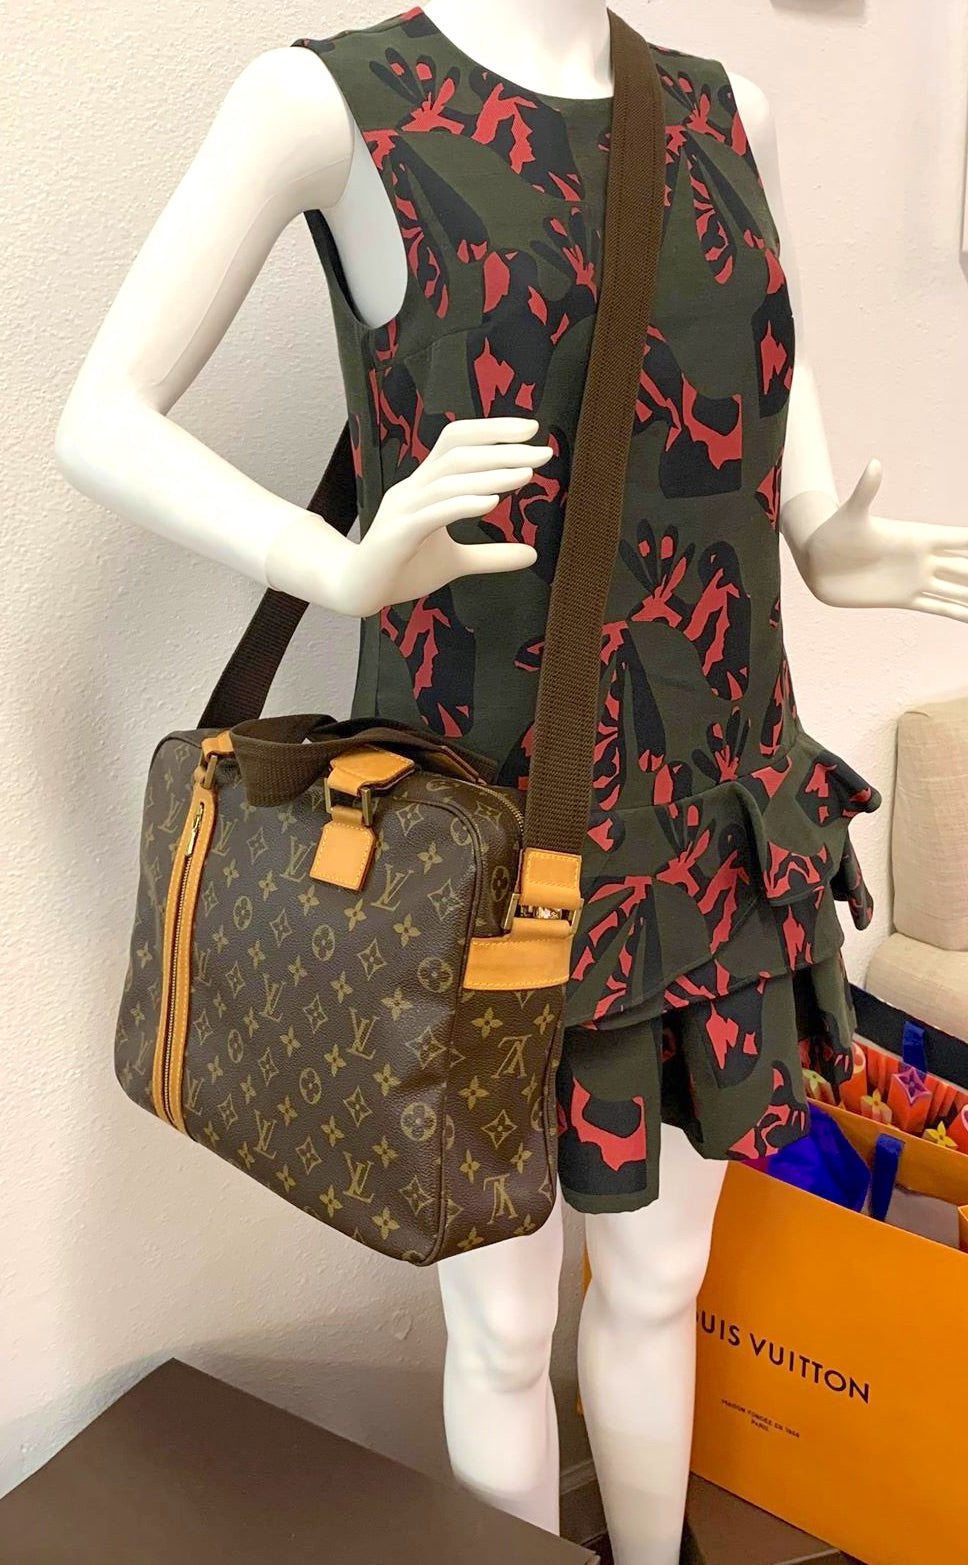 LOUIS VUITTON SAC BOSPHORE/BRIEFCASE, monogram canvas with brass hardware,  adjustable fabric shoulder strap, top zip pocket, two top handles, fabric  lining, front external zip pocket with dust bag, 34cm x 8cm x